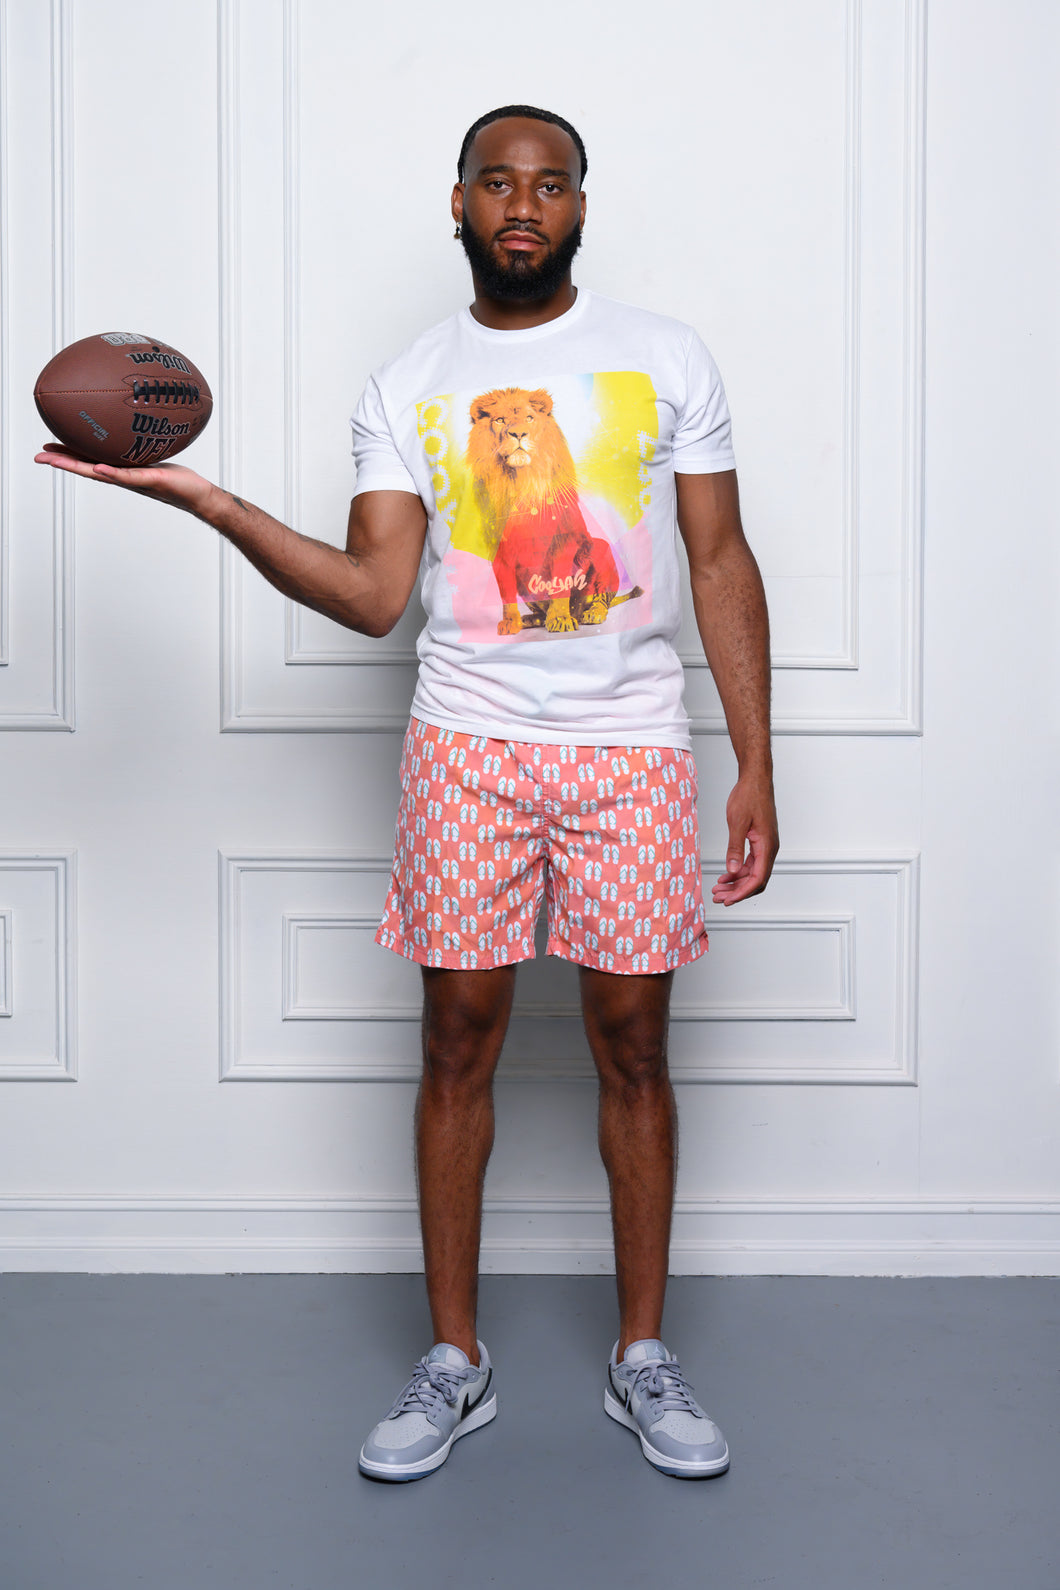 Cooyah Jamaica. Standing Lion Men's Graphic Tee featured on NFL player Tre'Quan Smith.  We are a Jamaican streetwear clothing brand established in 1987.